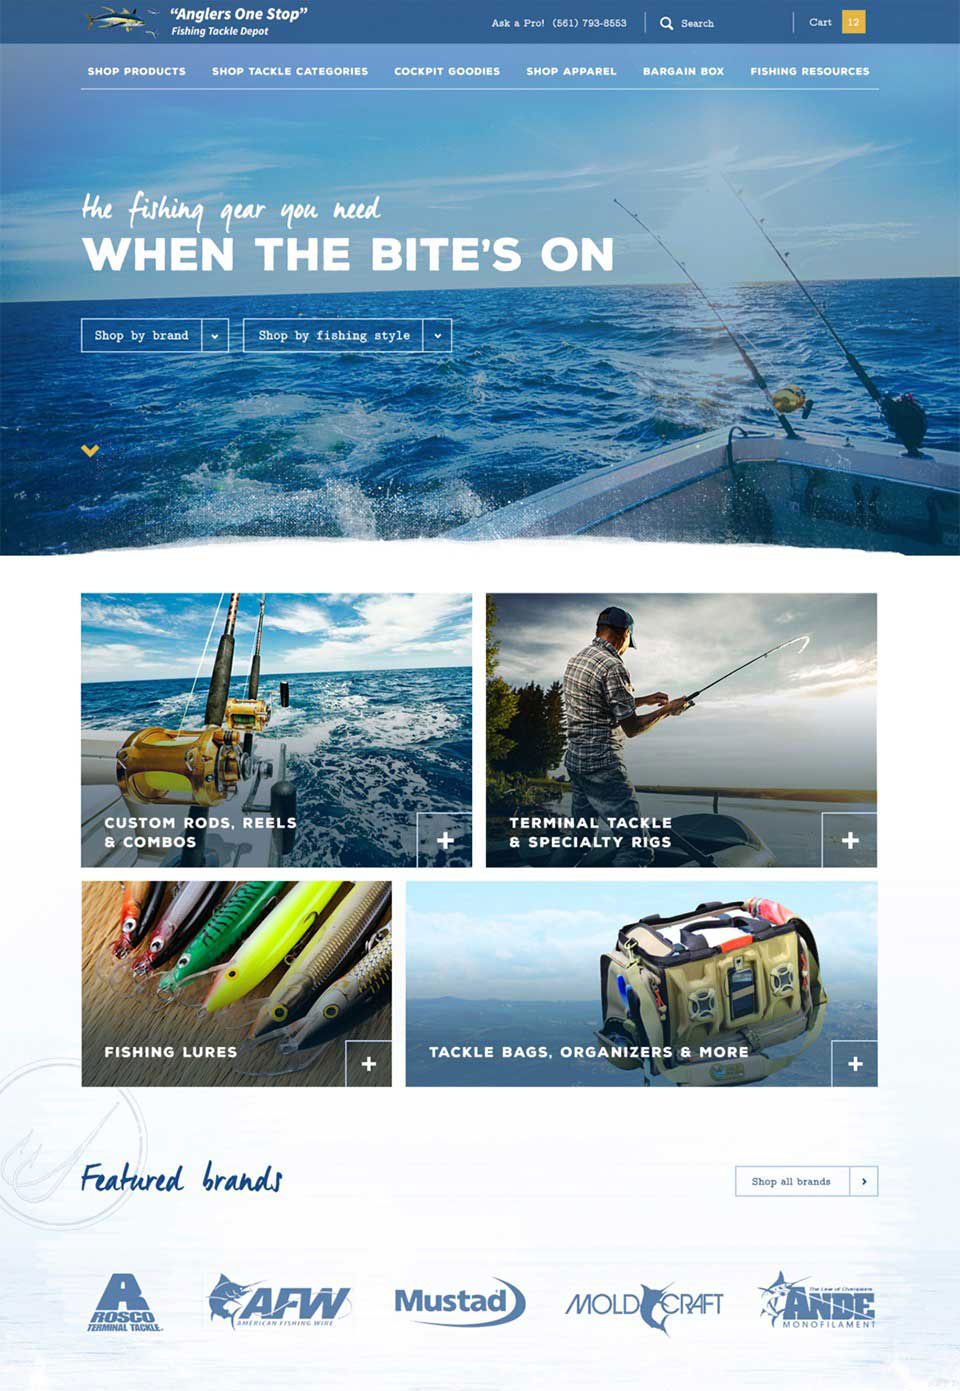 Anglers One Stop Fishing Tackle Depot